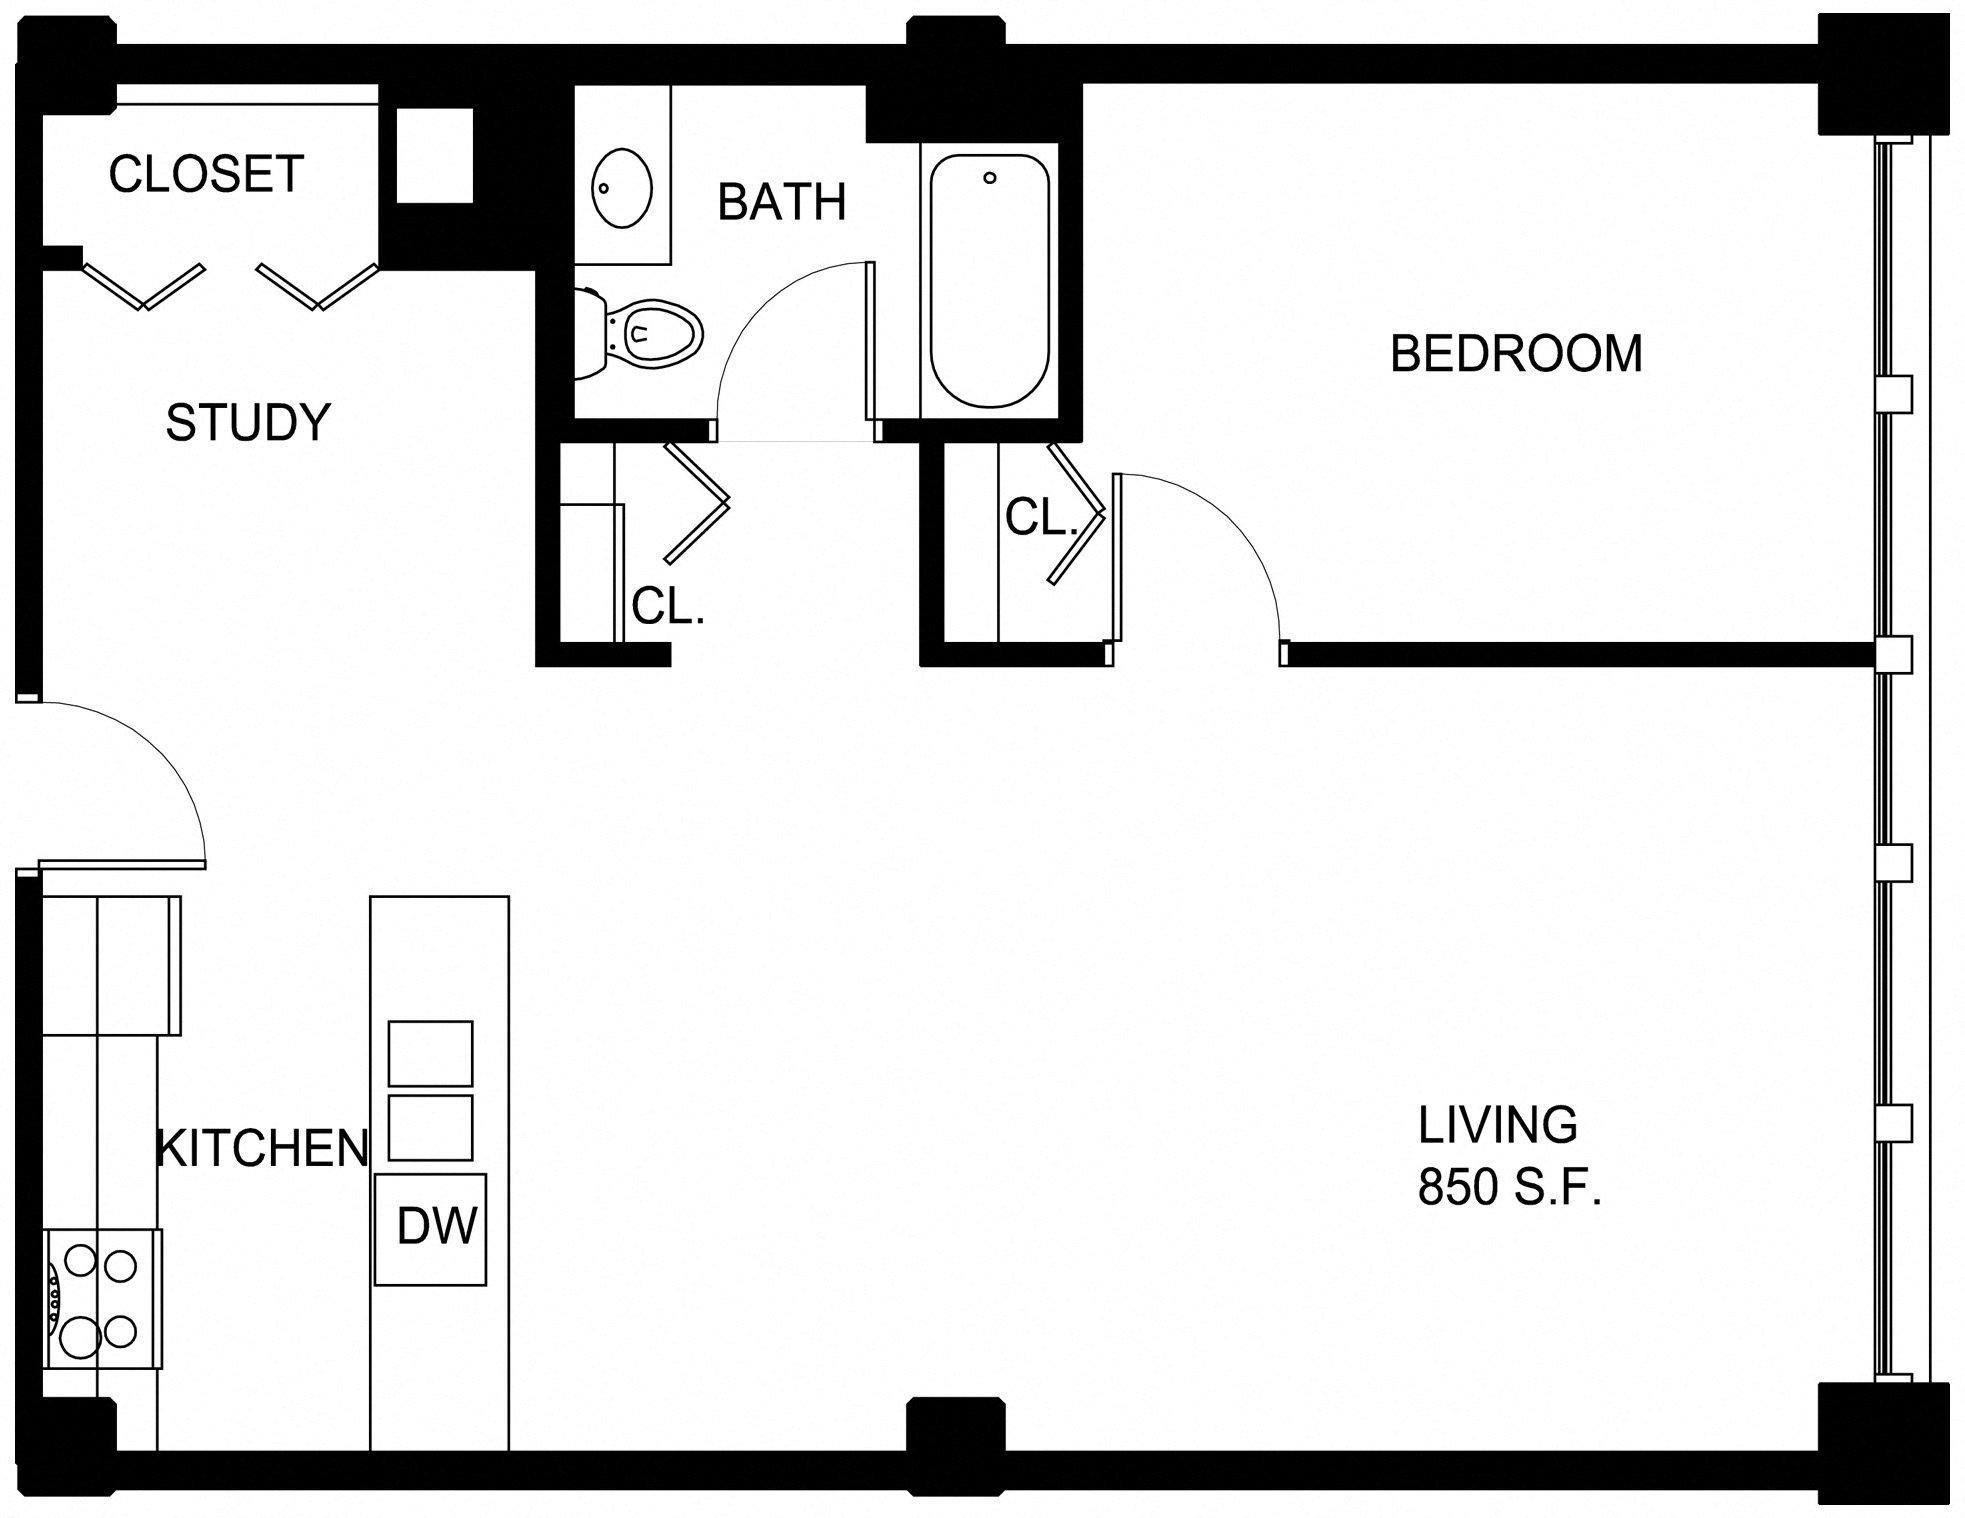 Floorplan for Apartment #P258, 1 bedroom unit at Halstead Providence